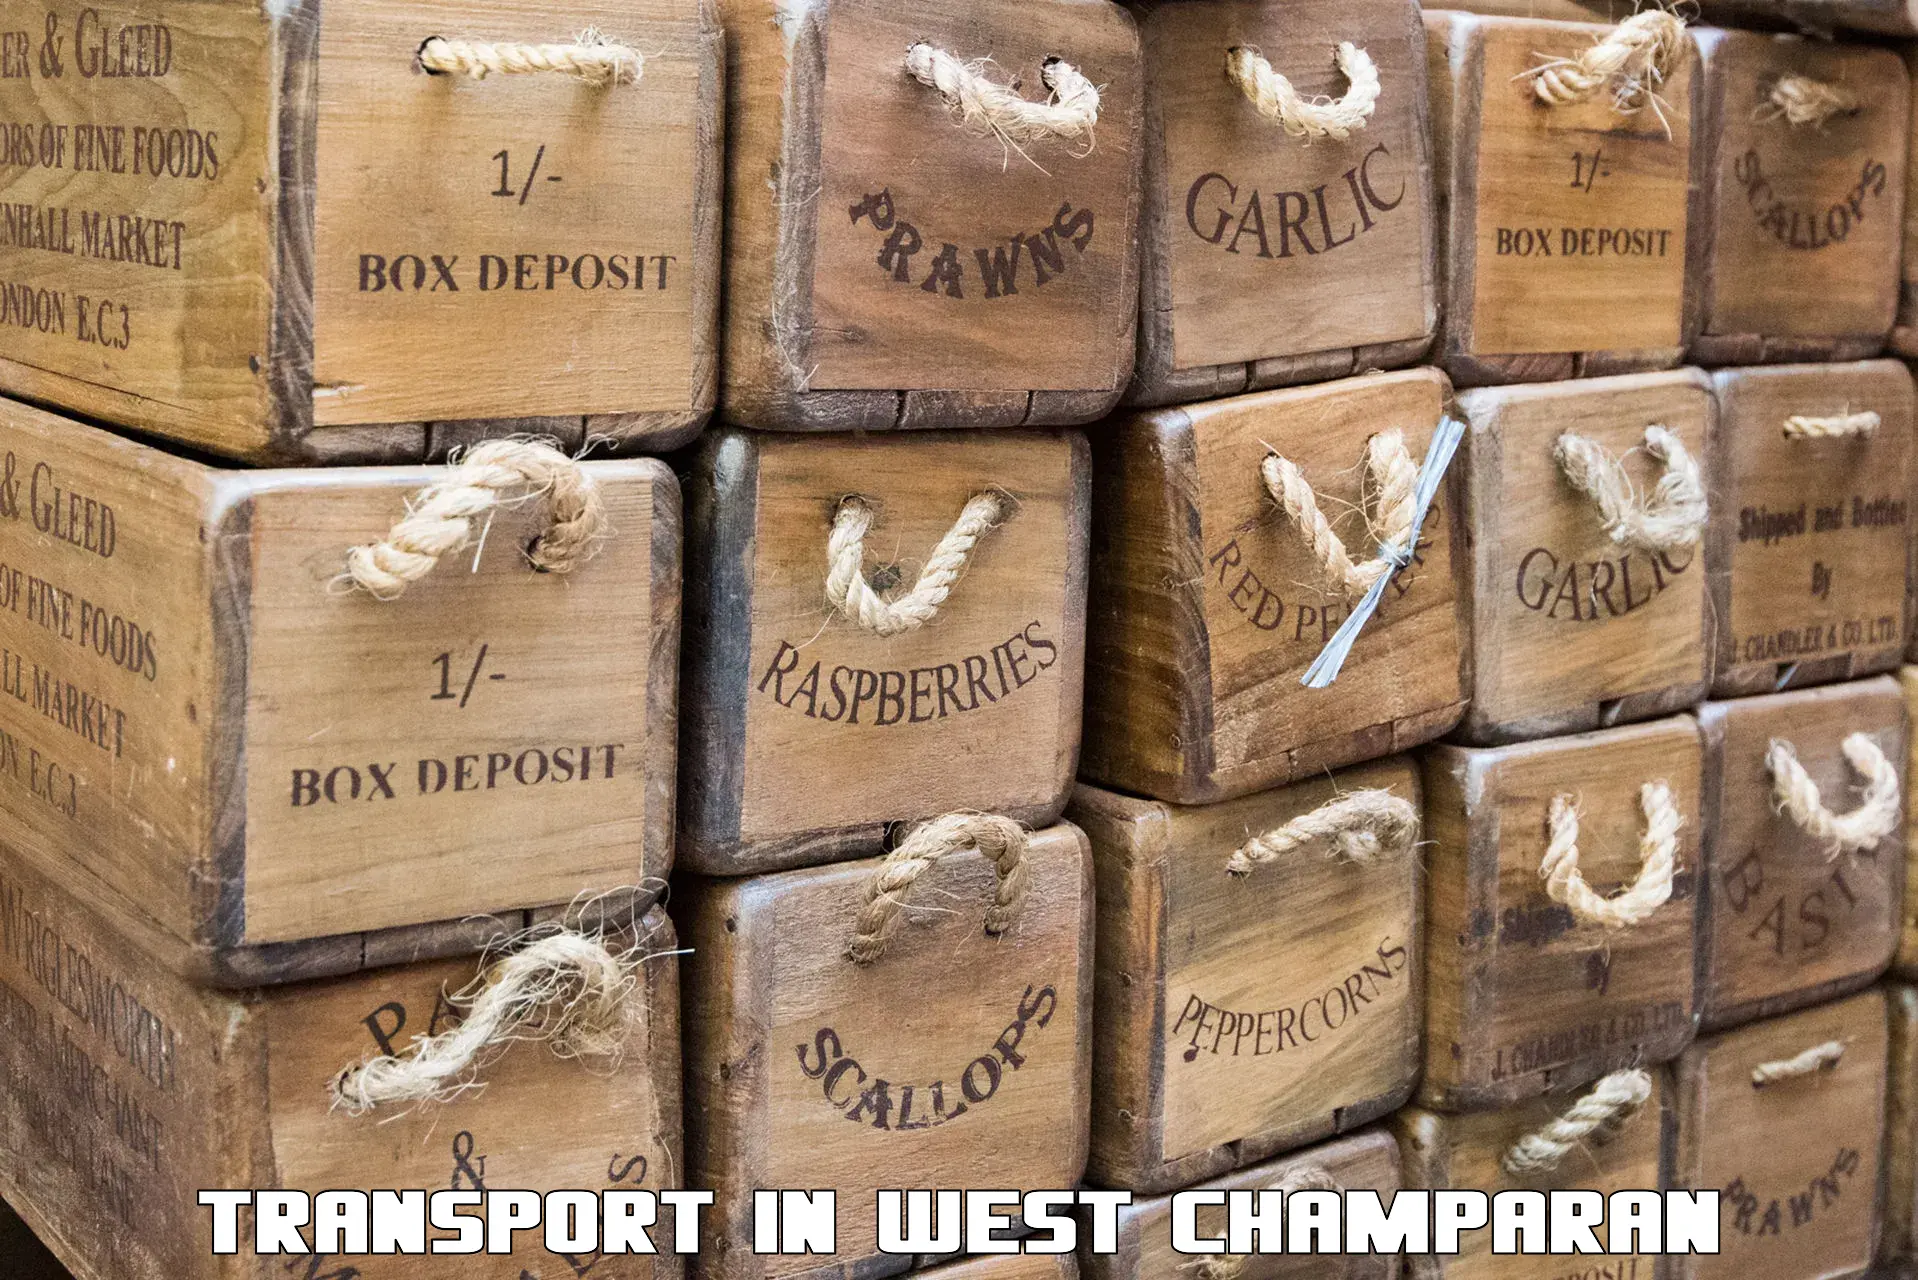 Transport services in West Champaran